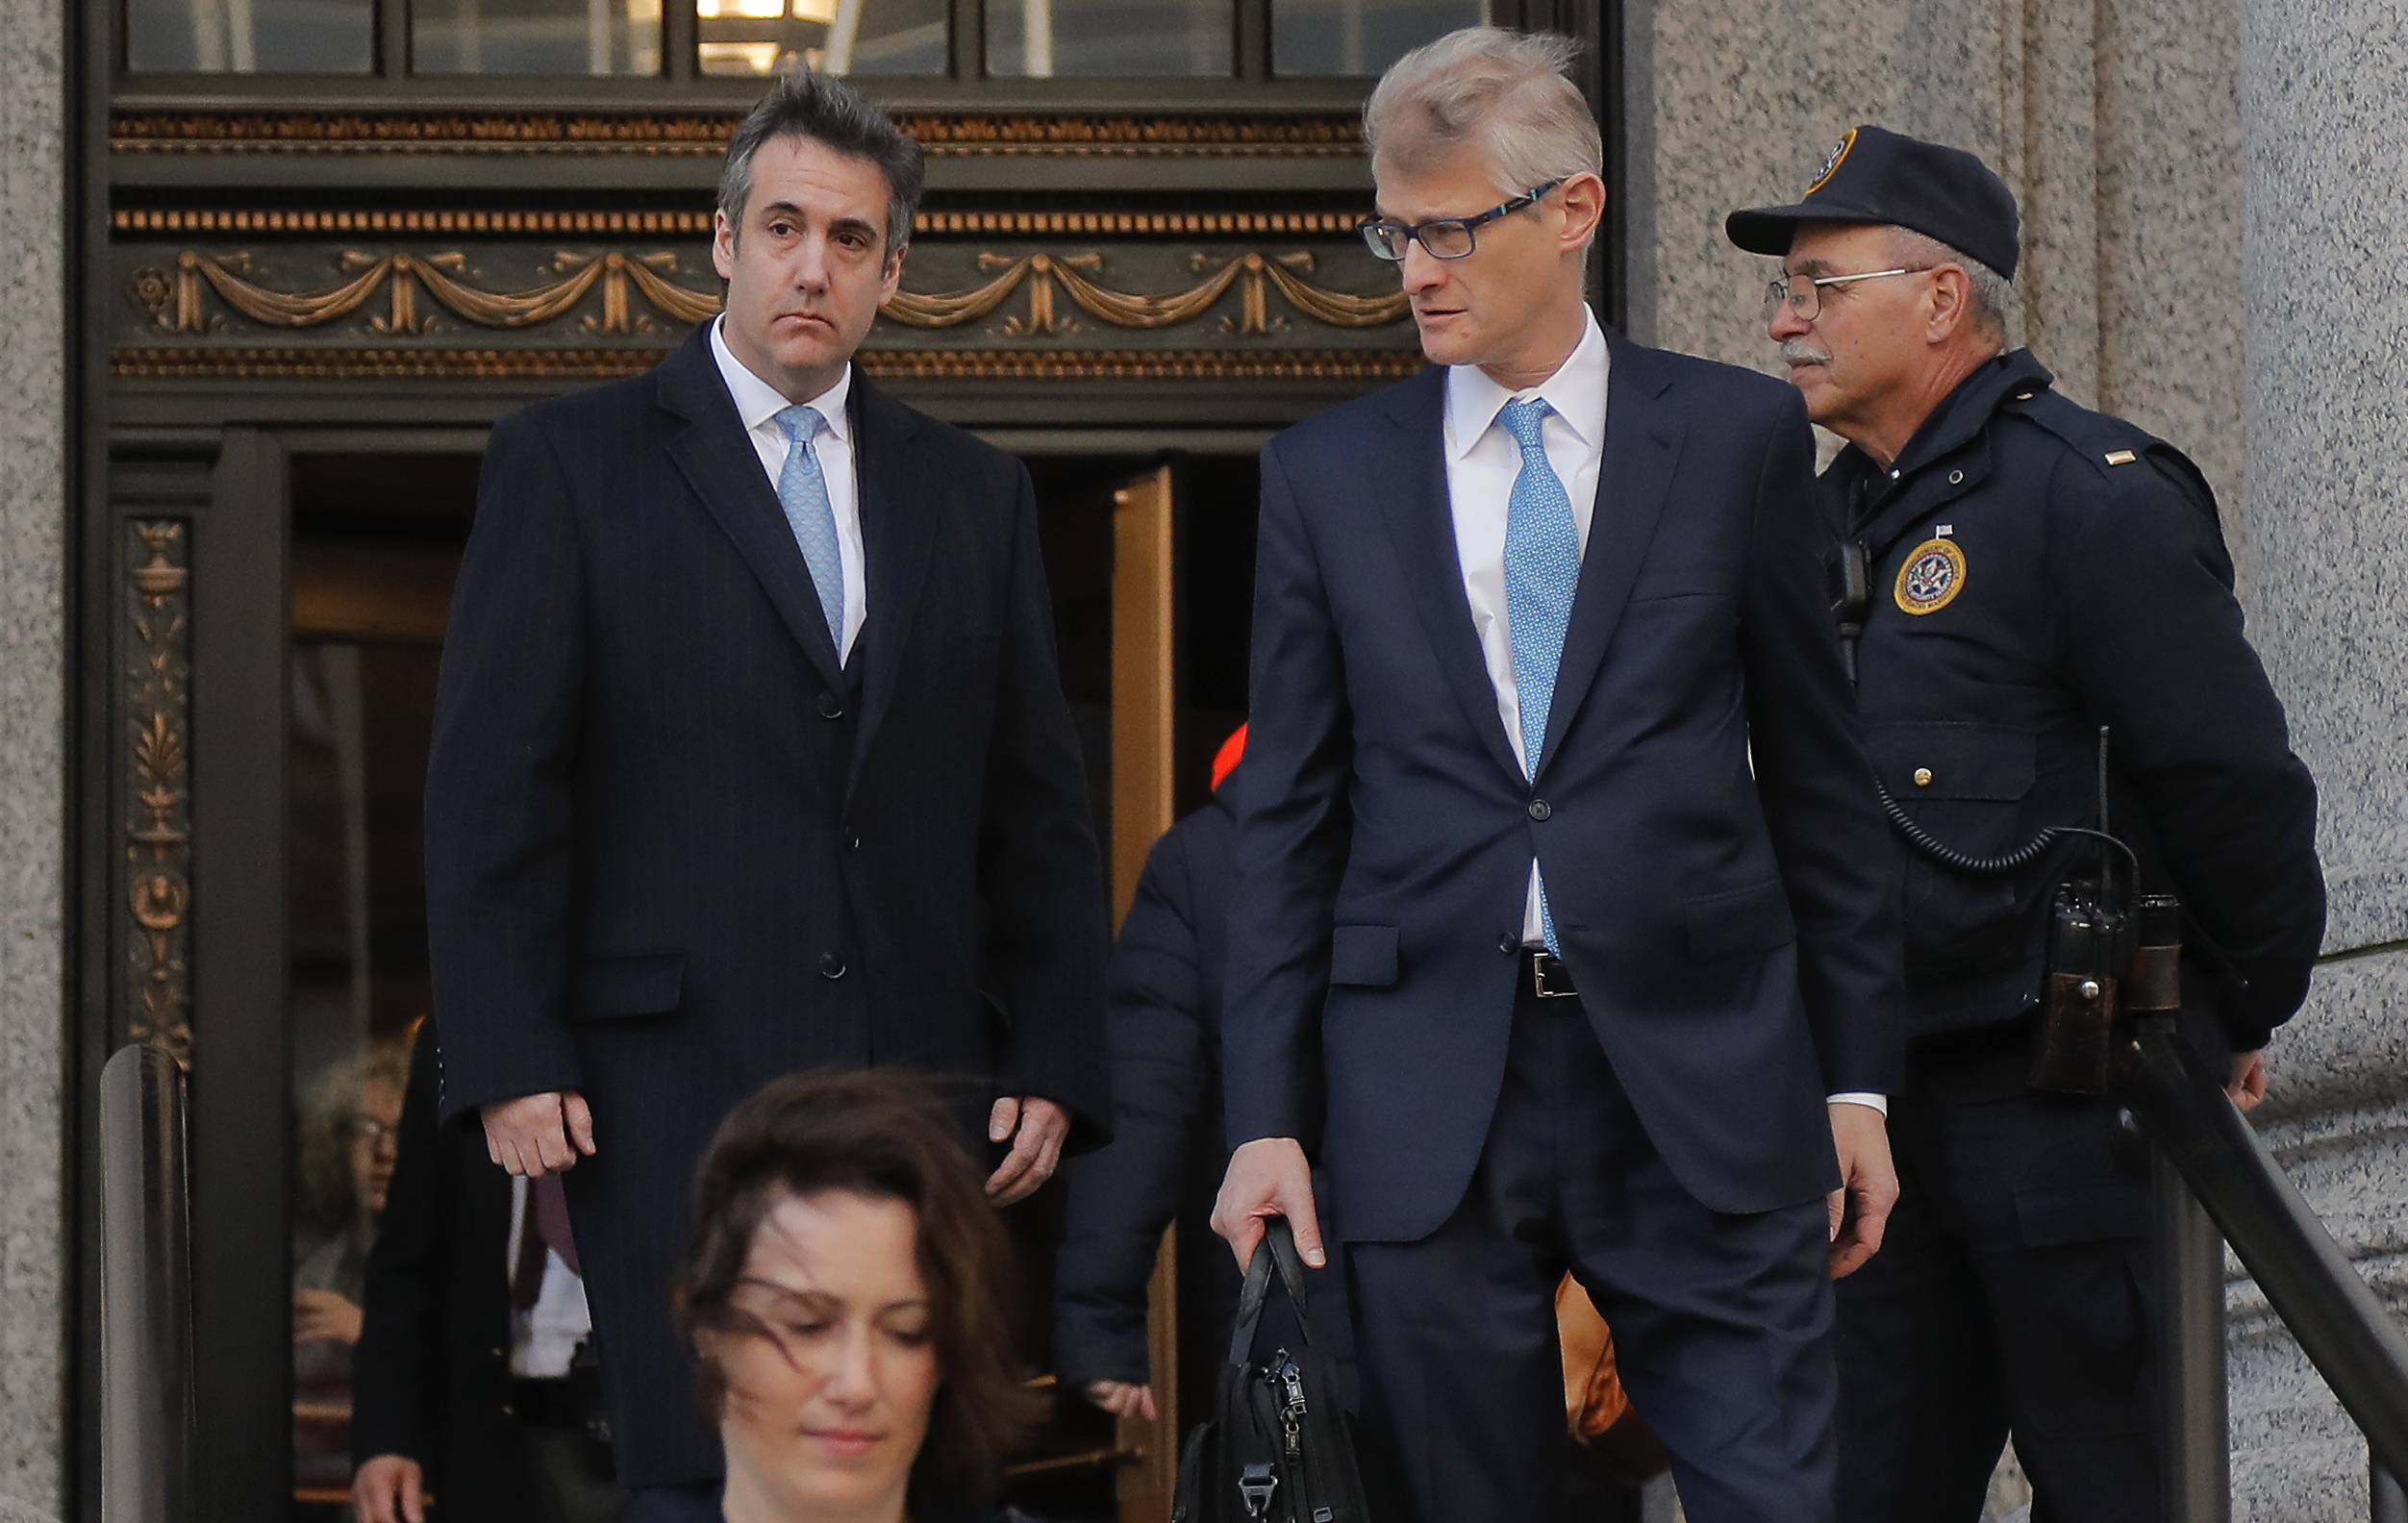 Michael Cohen, left, walks out of federal court in New York with his lawyer Guy Petrillo